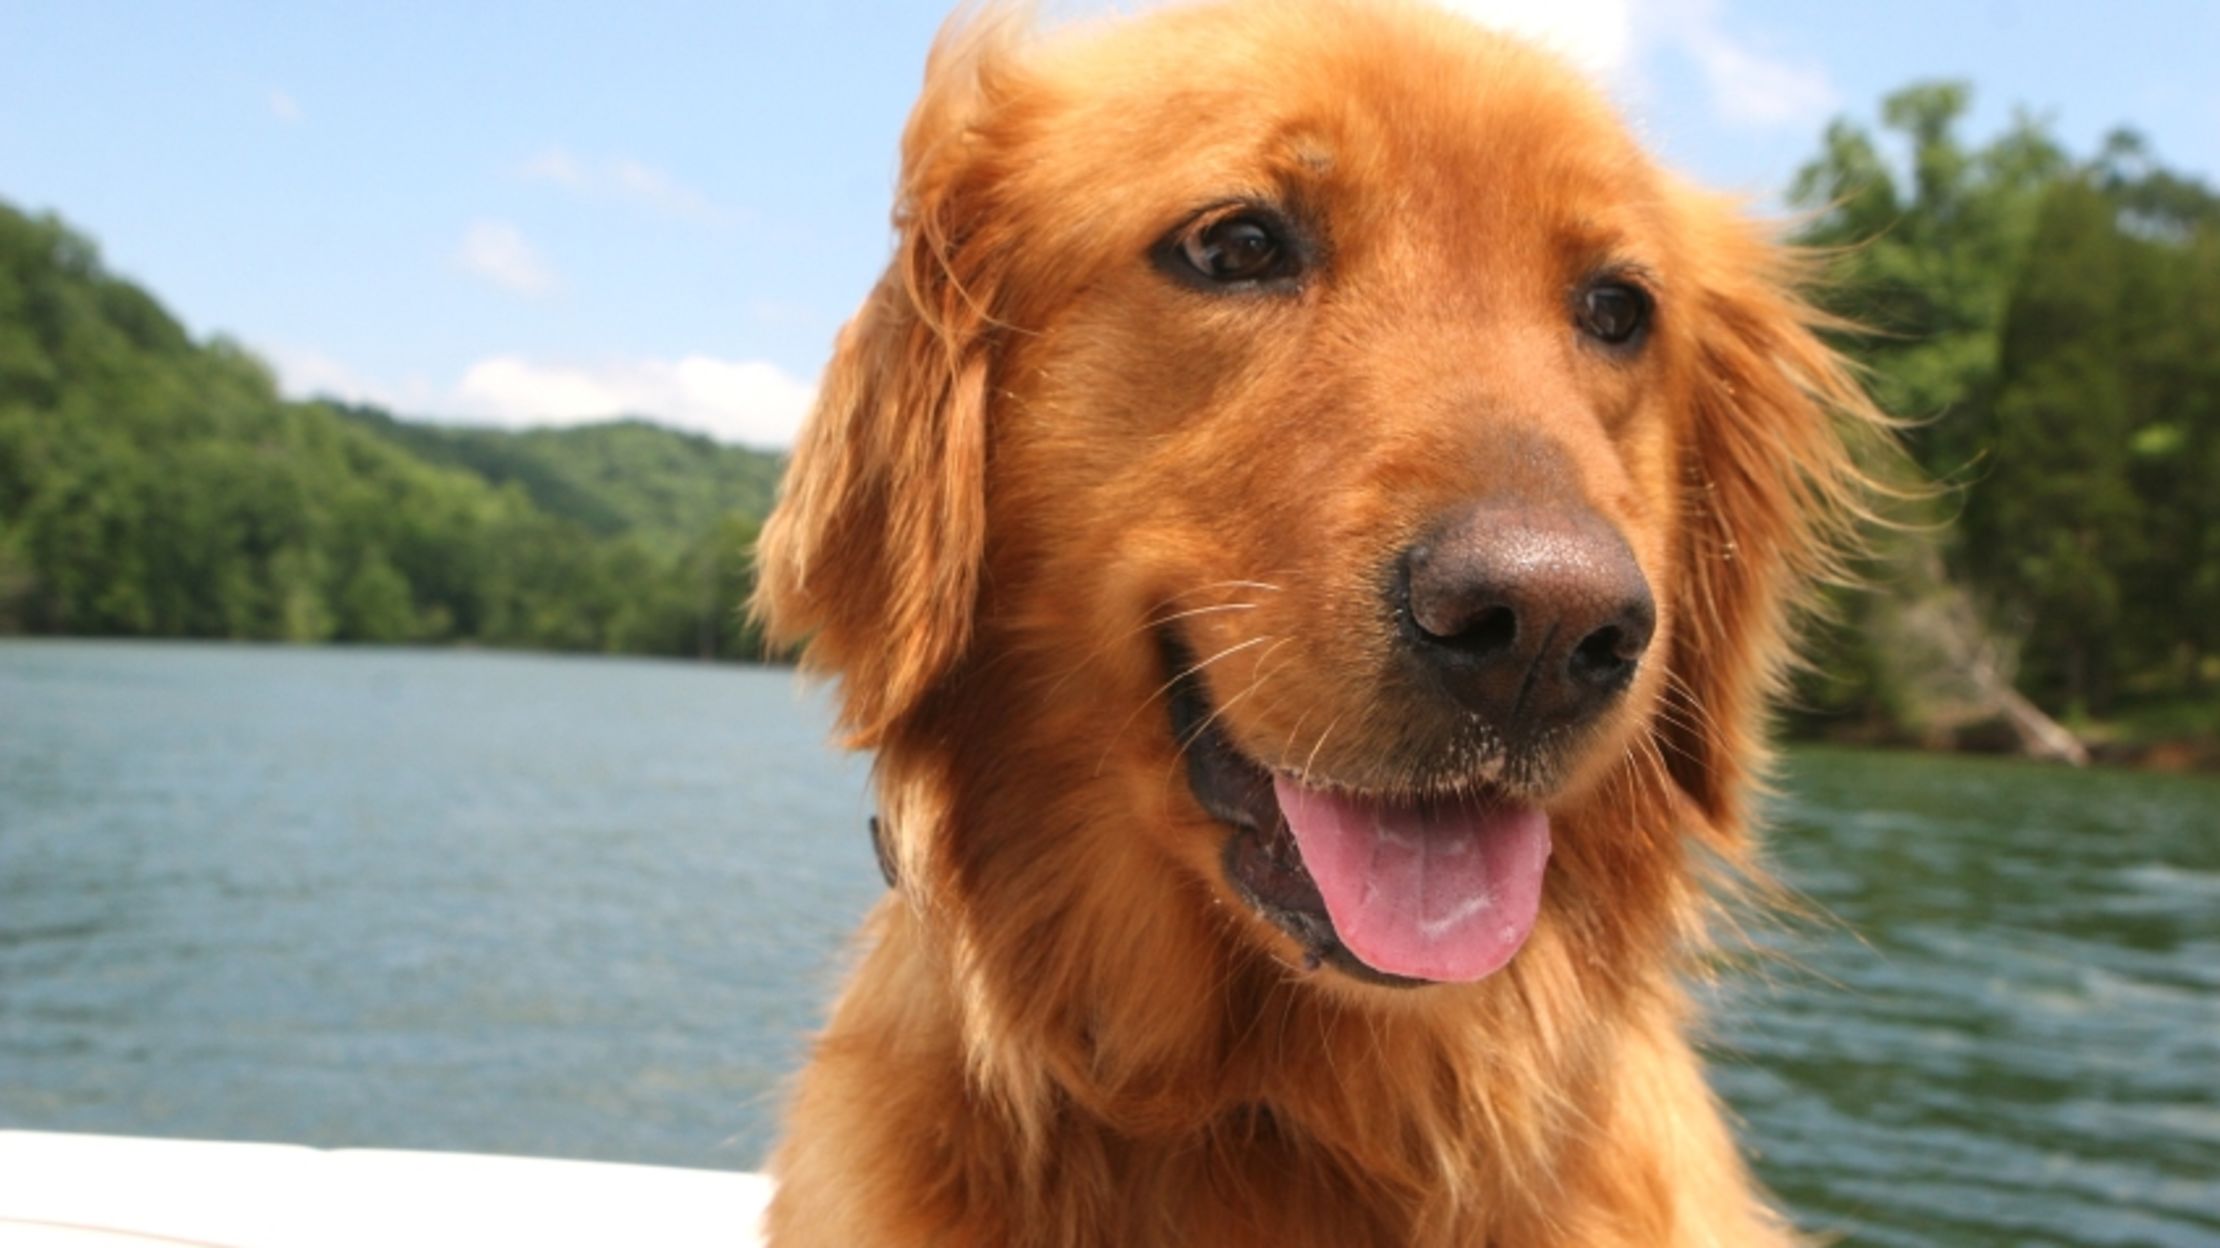 10 Friendly Facts About the Golden Retriever